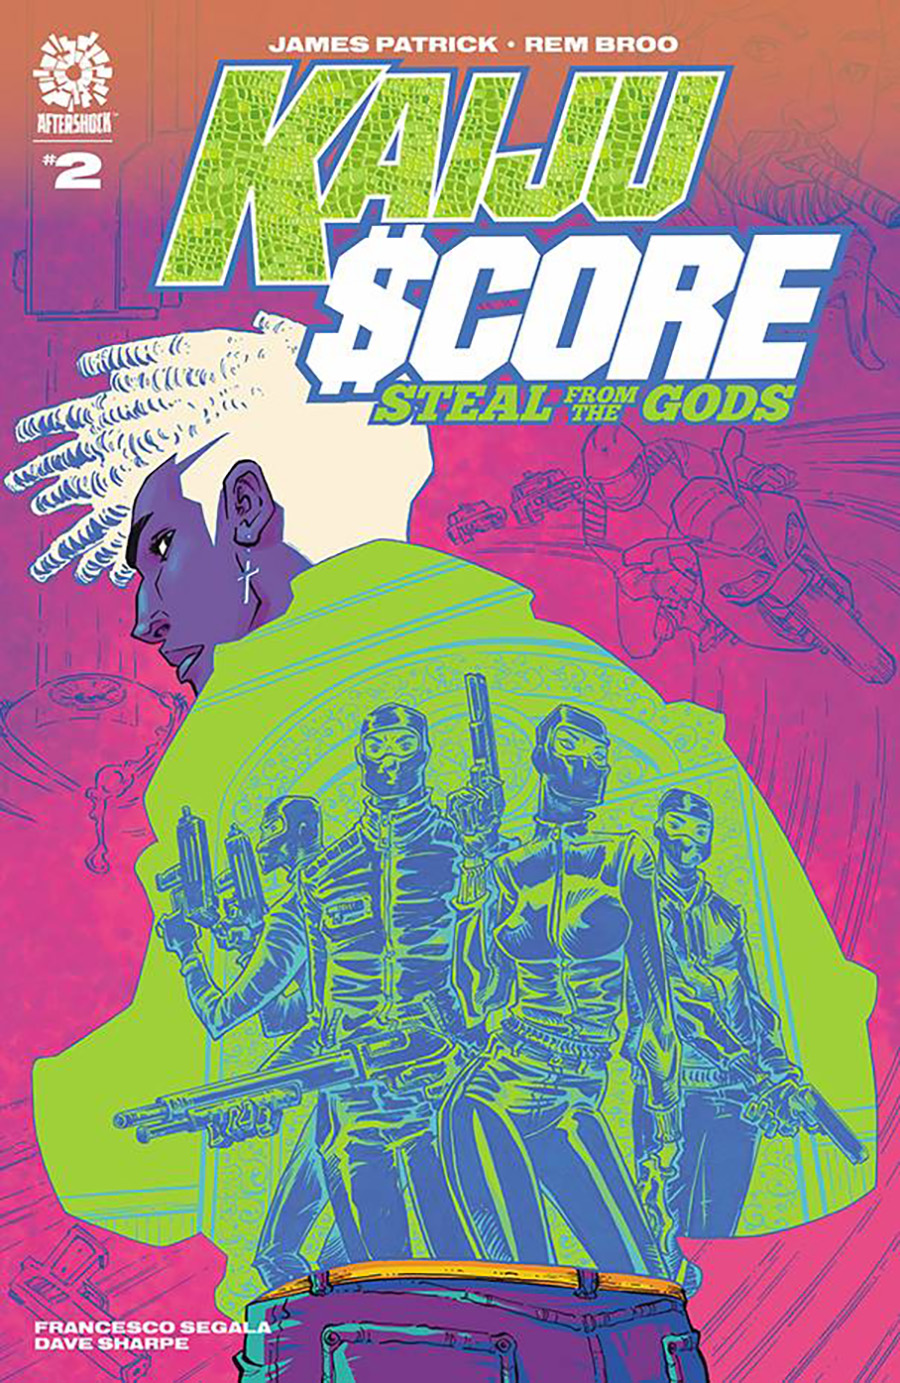 Kaiju Score Steal From The Gods #2